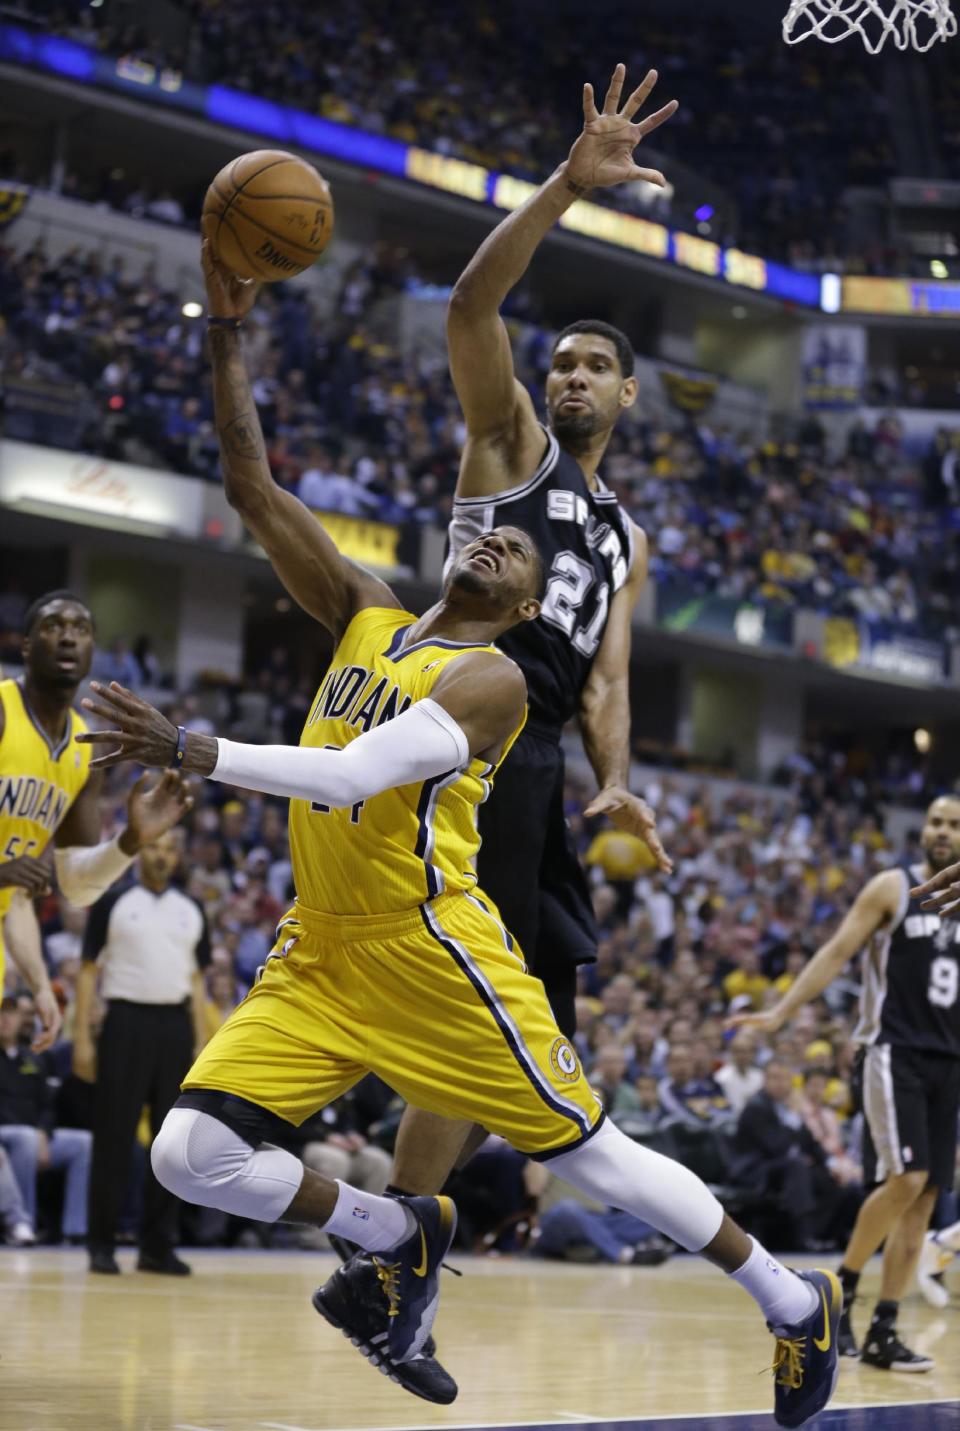 Indiana Pacers forward Paul George, left, is fouled from behind by San Antonio Spurs forward Tim Duncan in the first half of an NBA basketball game in Indianapolis, Monday, March 31, 2014. (AP Photo/Michael Conroy)